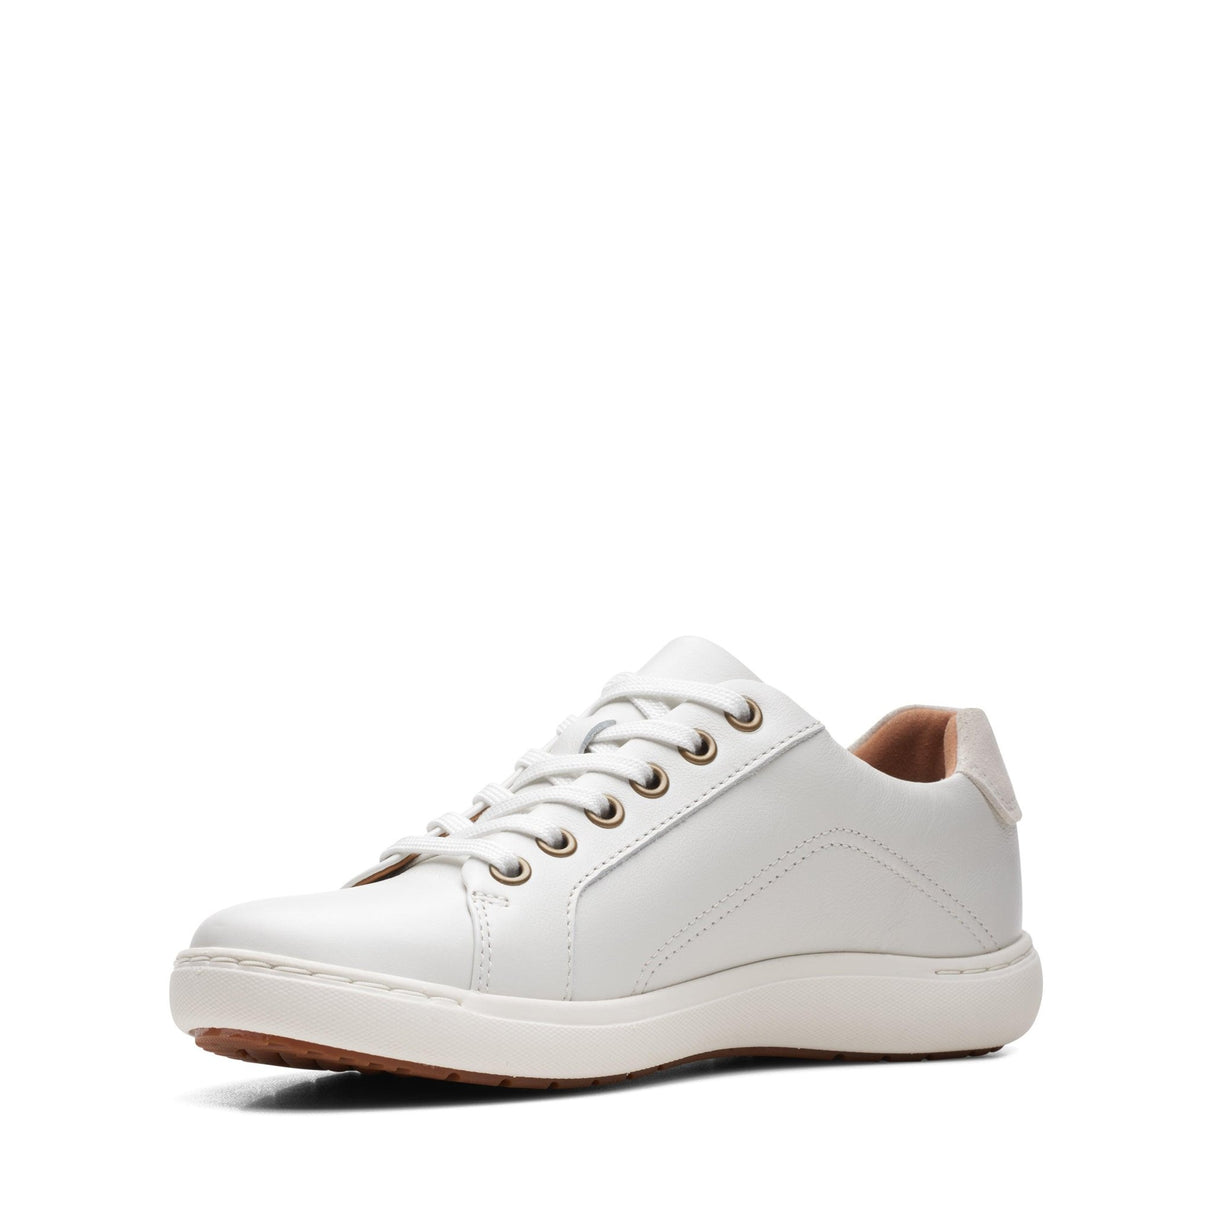 Clarks Women's Nalle Lace Sneakers - A&M Clothing & Shoes